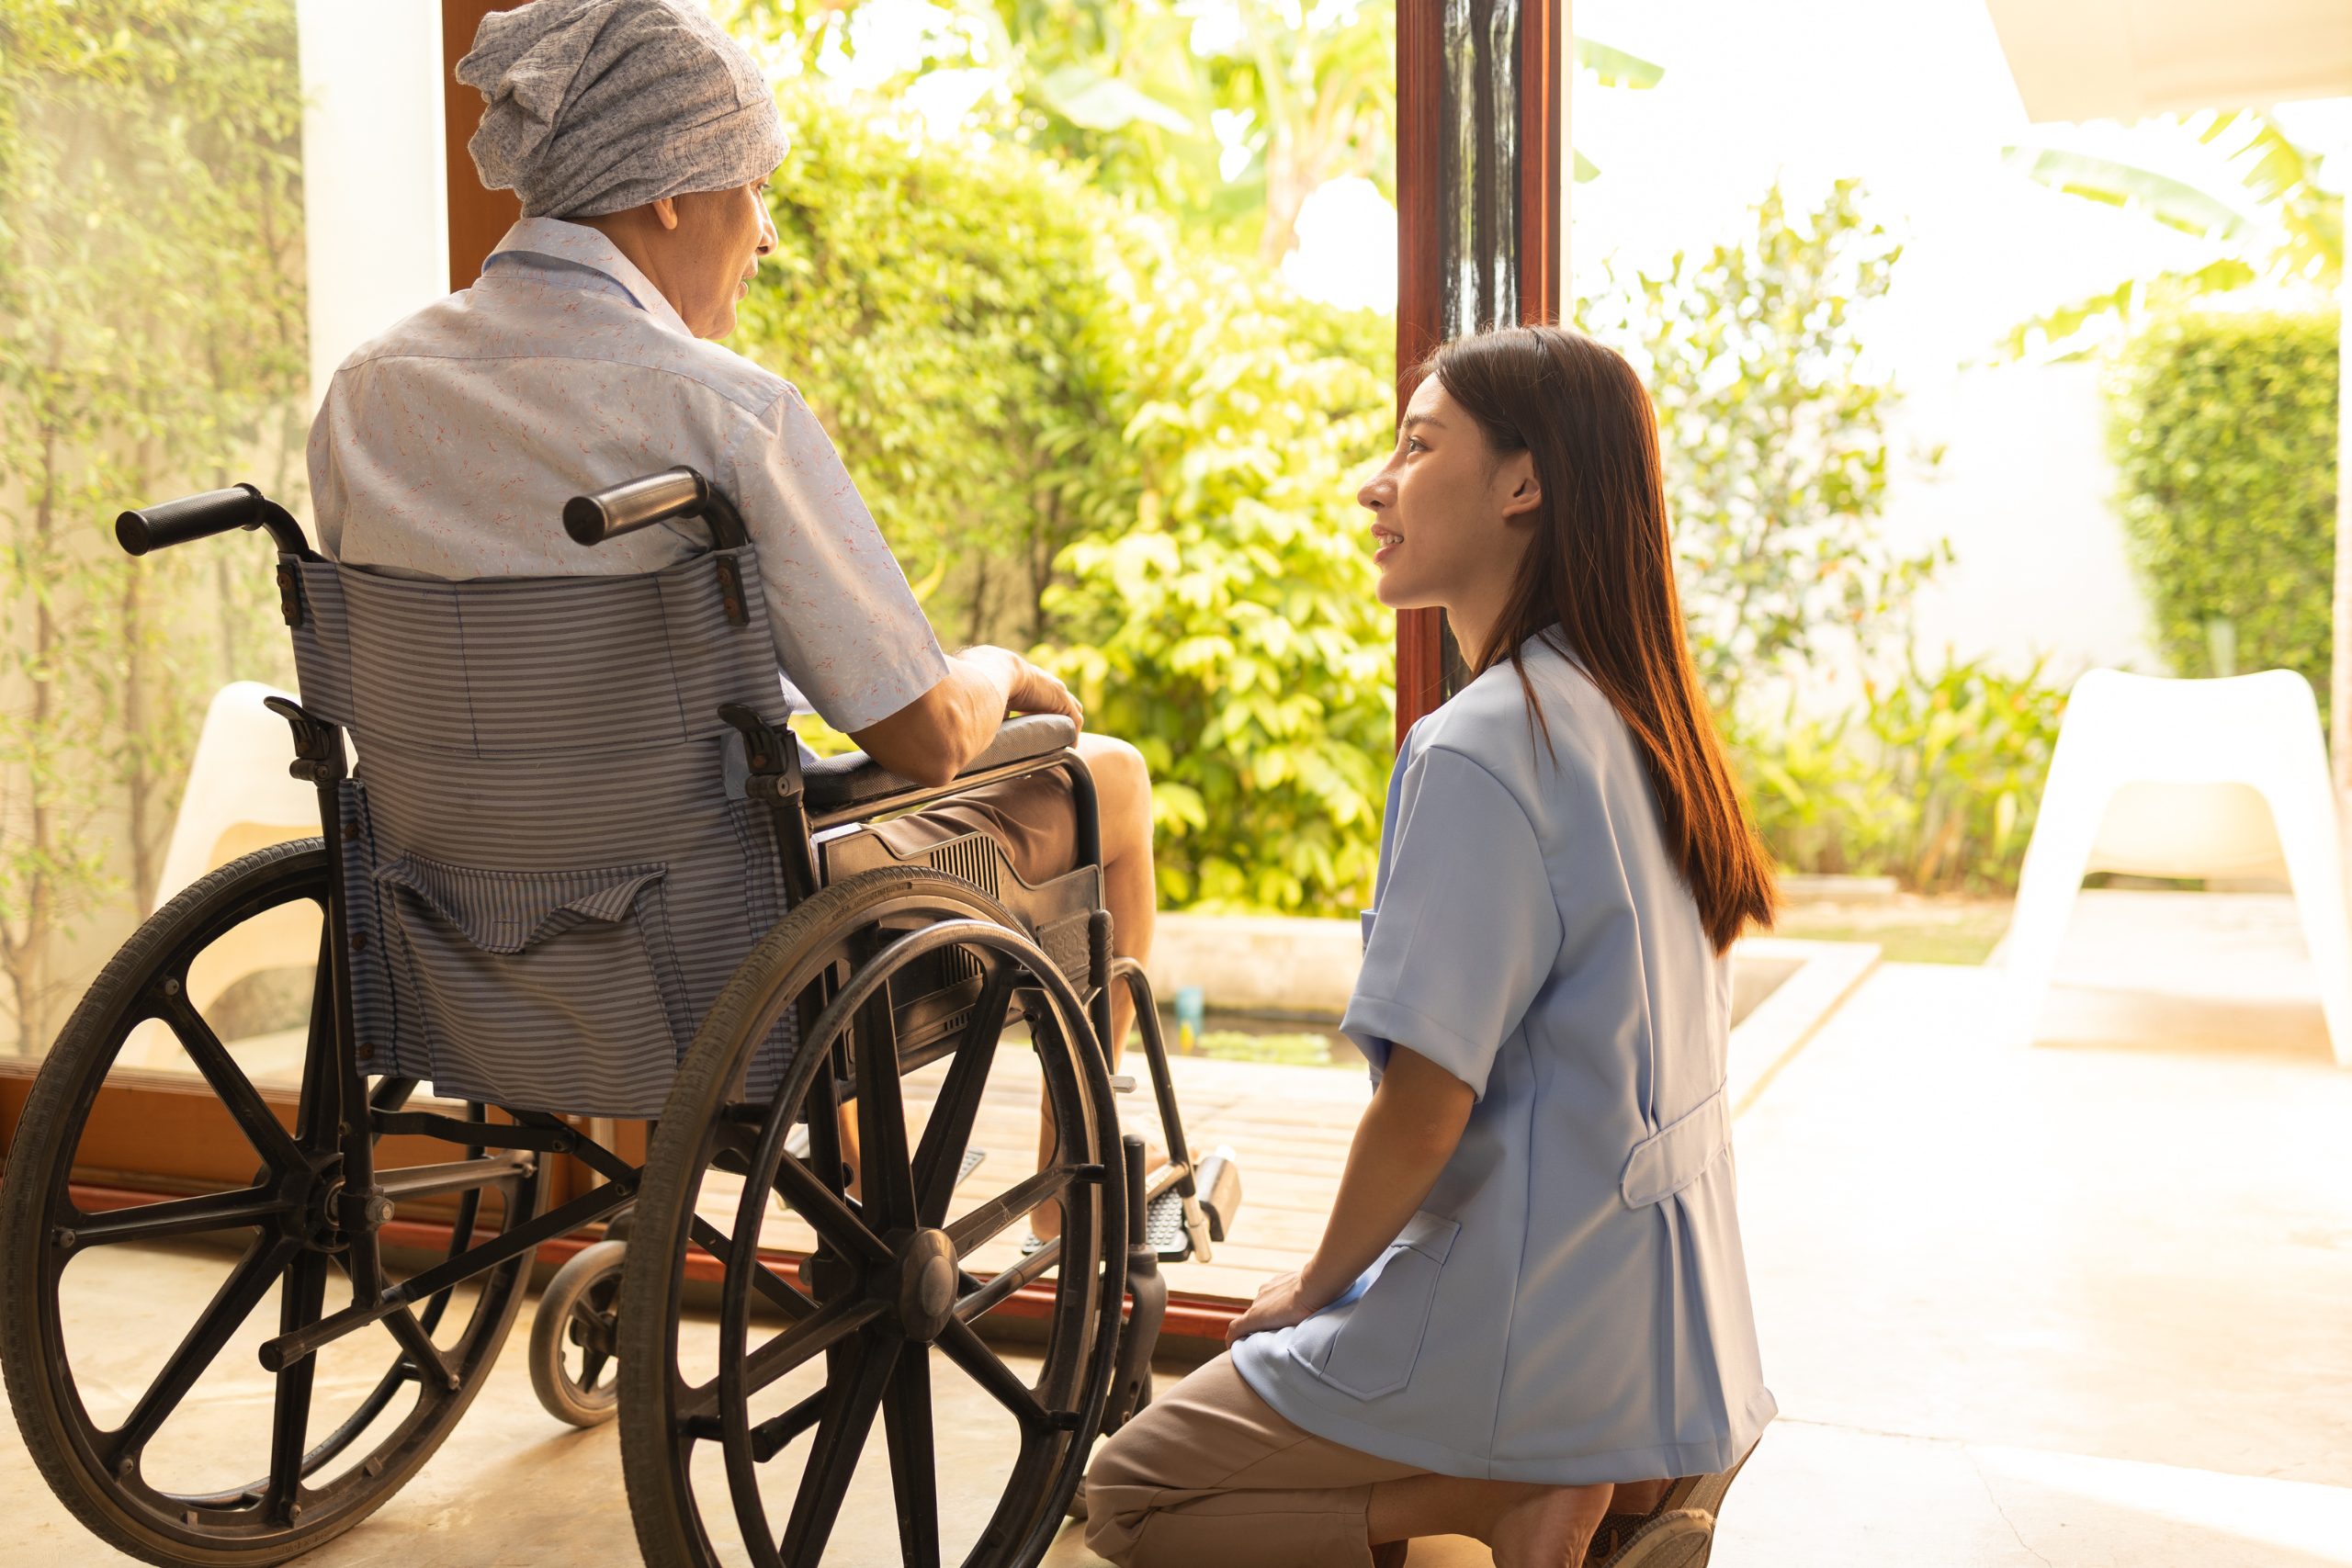 A caring nurse in blue scrubs kneels beside a senior patient in a wheelchair, engaging in a warm, attentive conversation, illustrating the compassionate advocacy and communication in nursing home care.